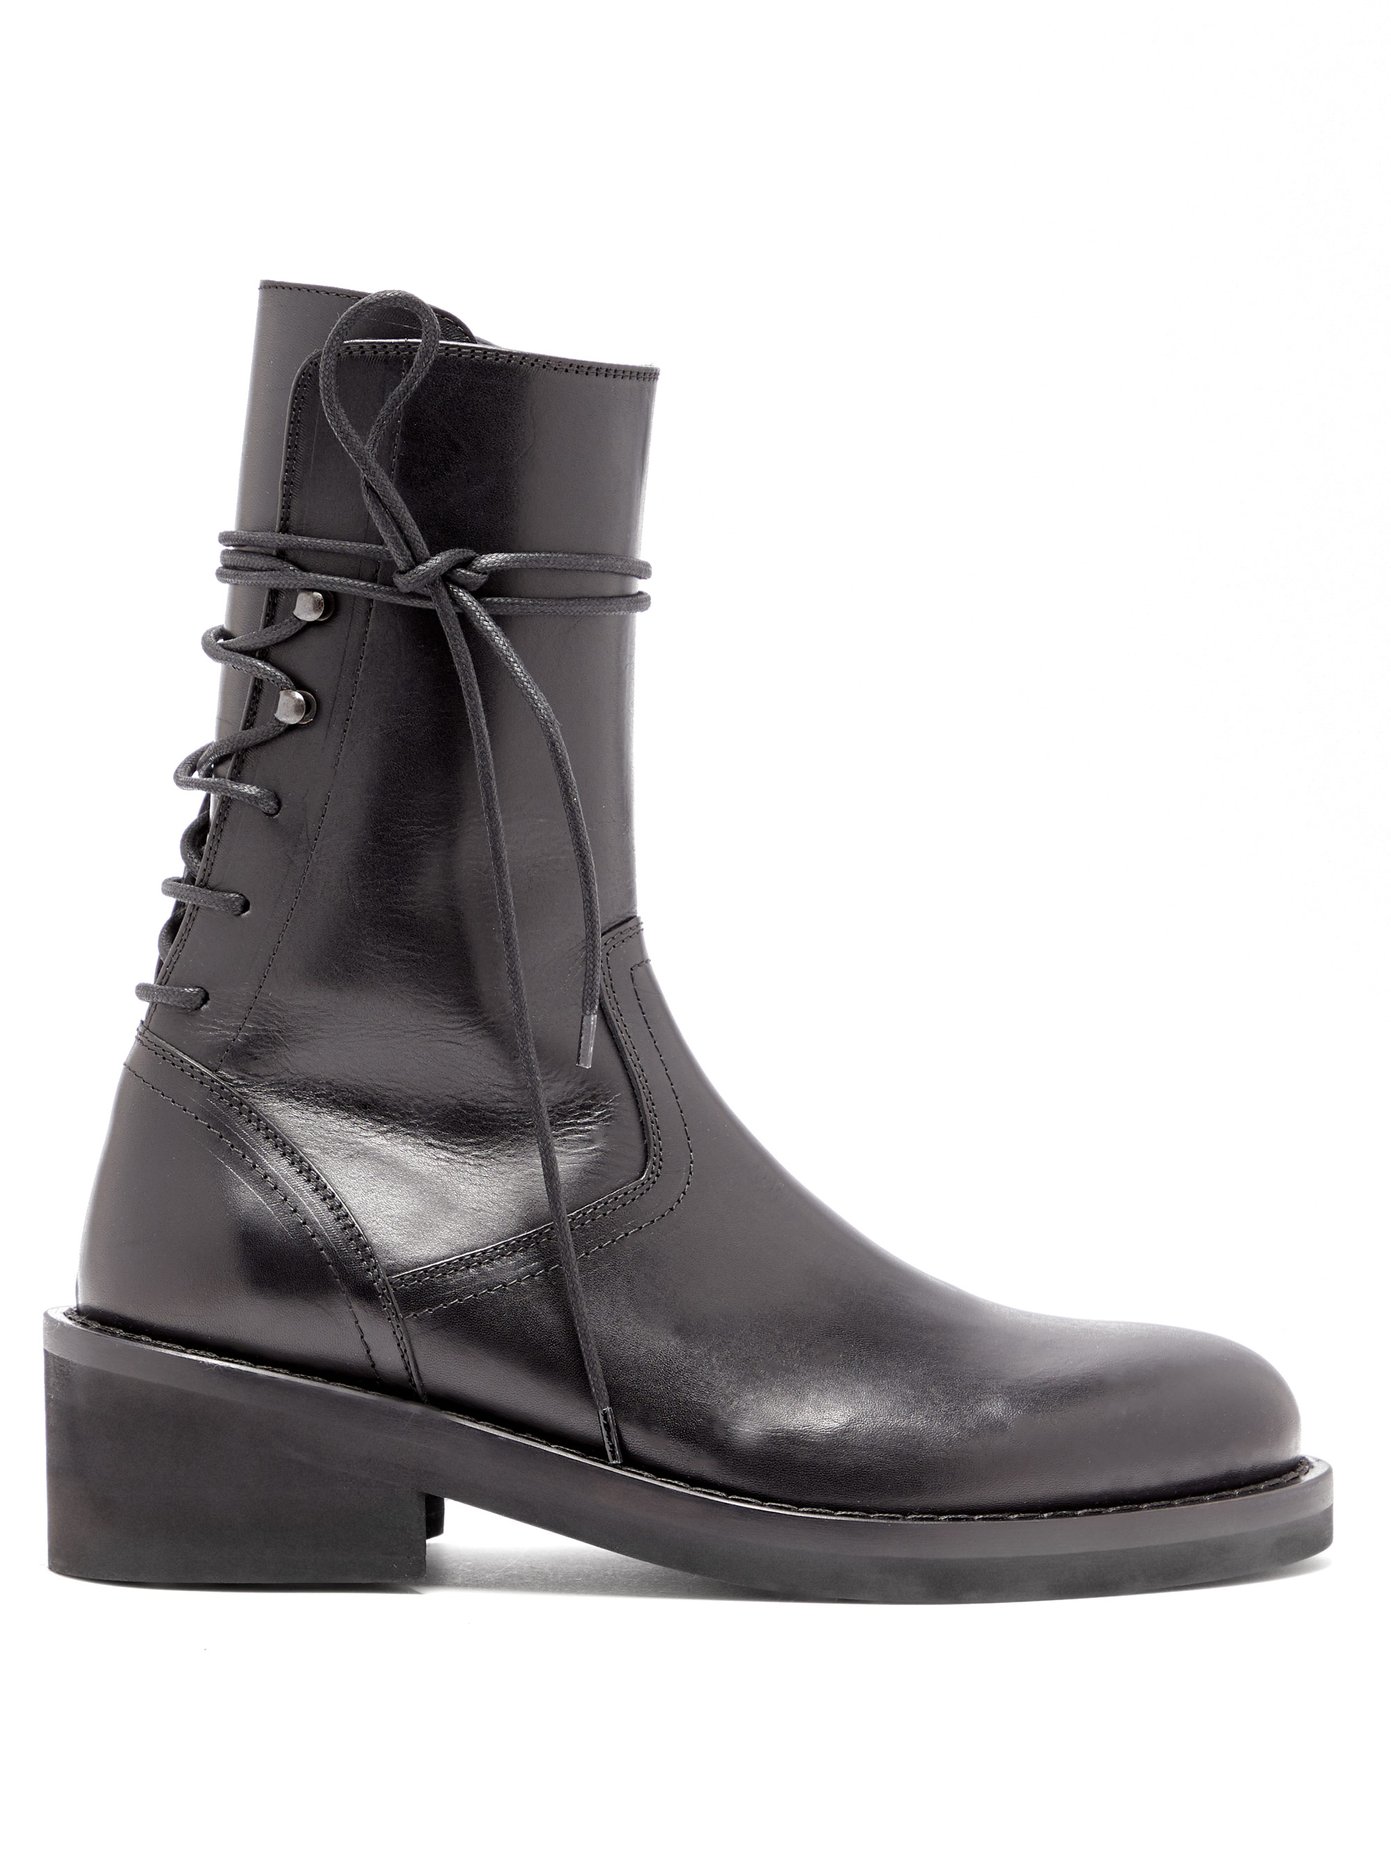 Lace-up back leather ankle boots | Ann 